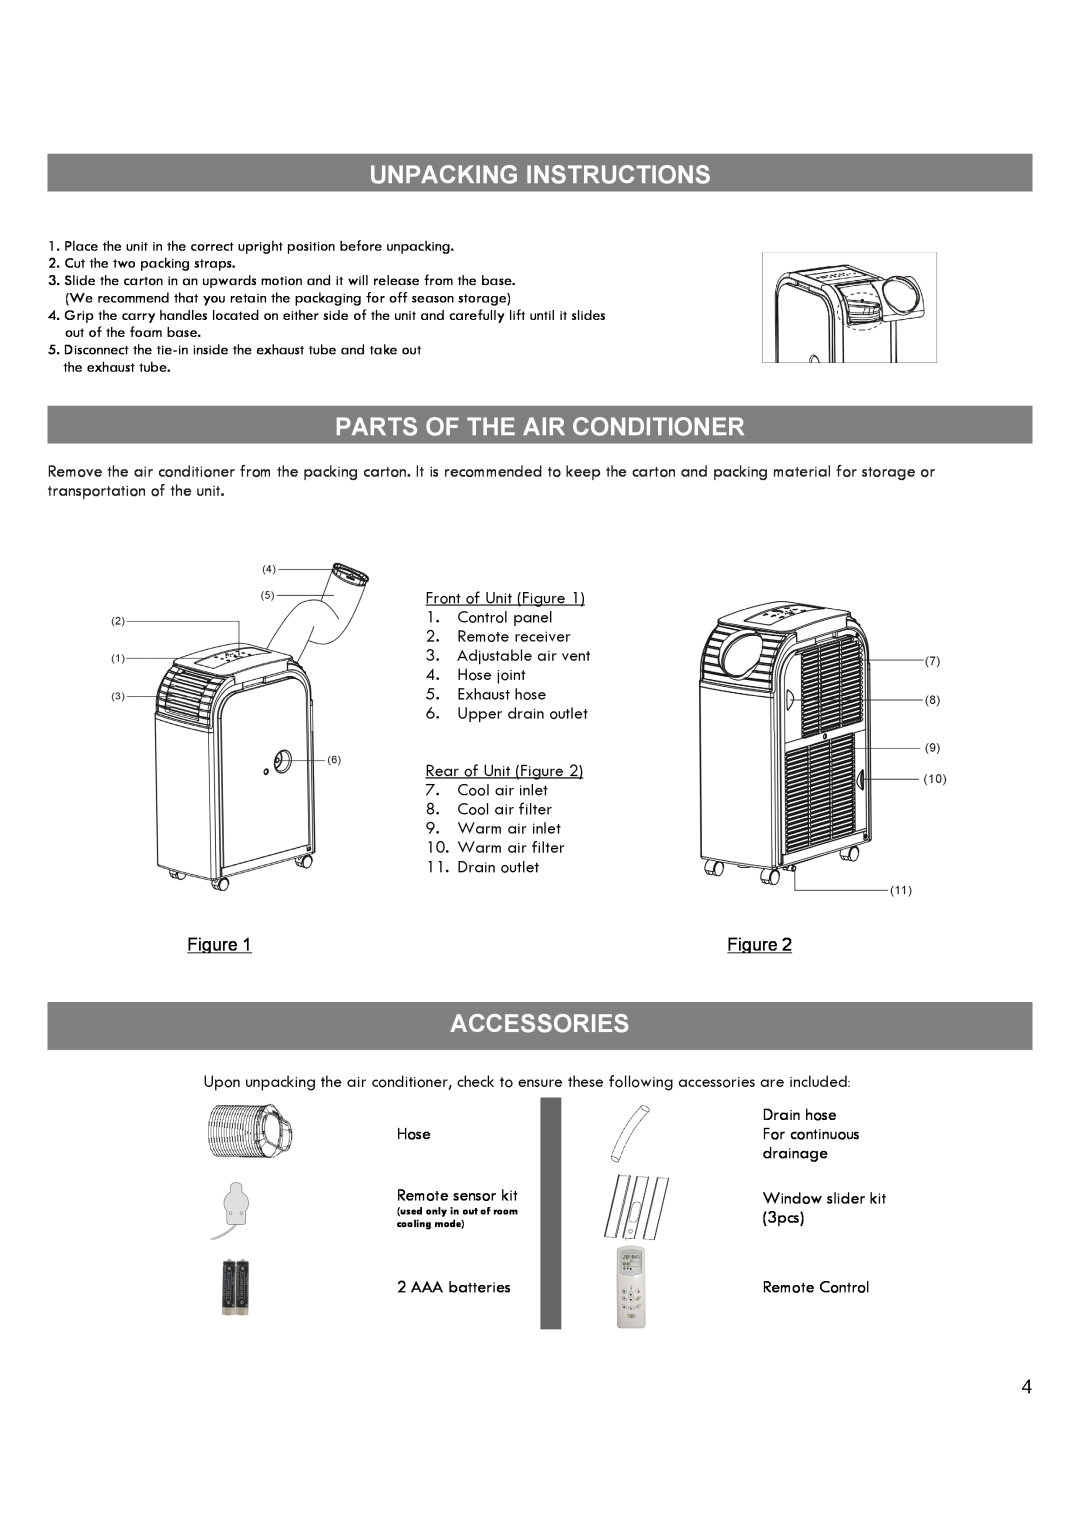 Kenmore 35132 manual Unpacking Instructions, Parts Of The Air Conditioner, Accessories 